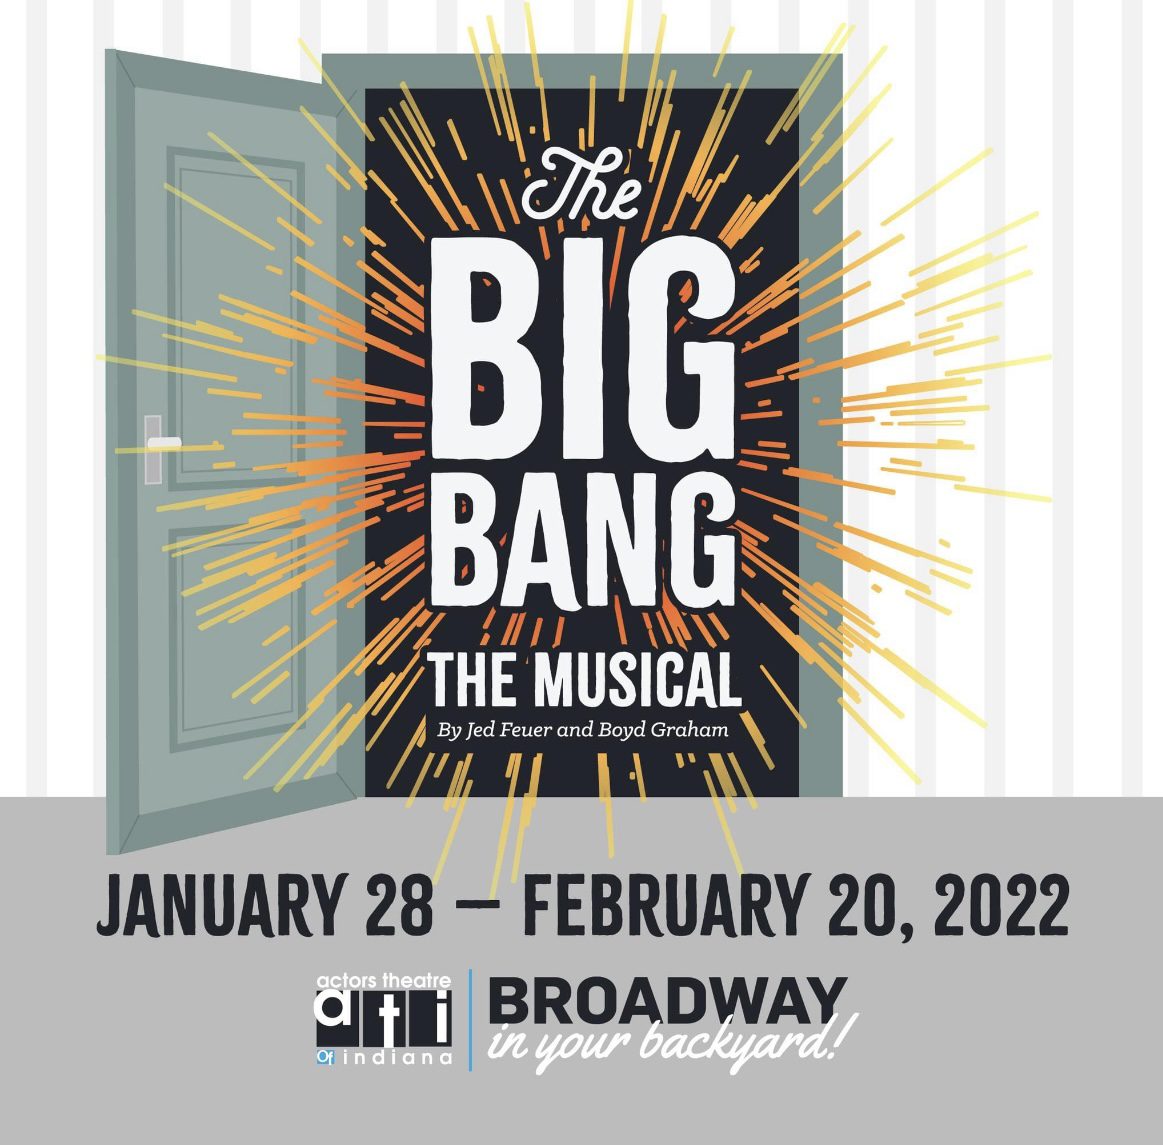 Off to the ATI to direct The Big Bang musical